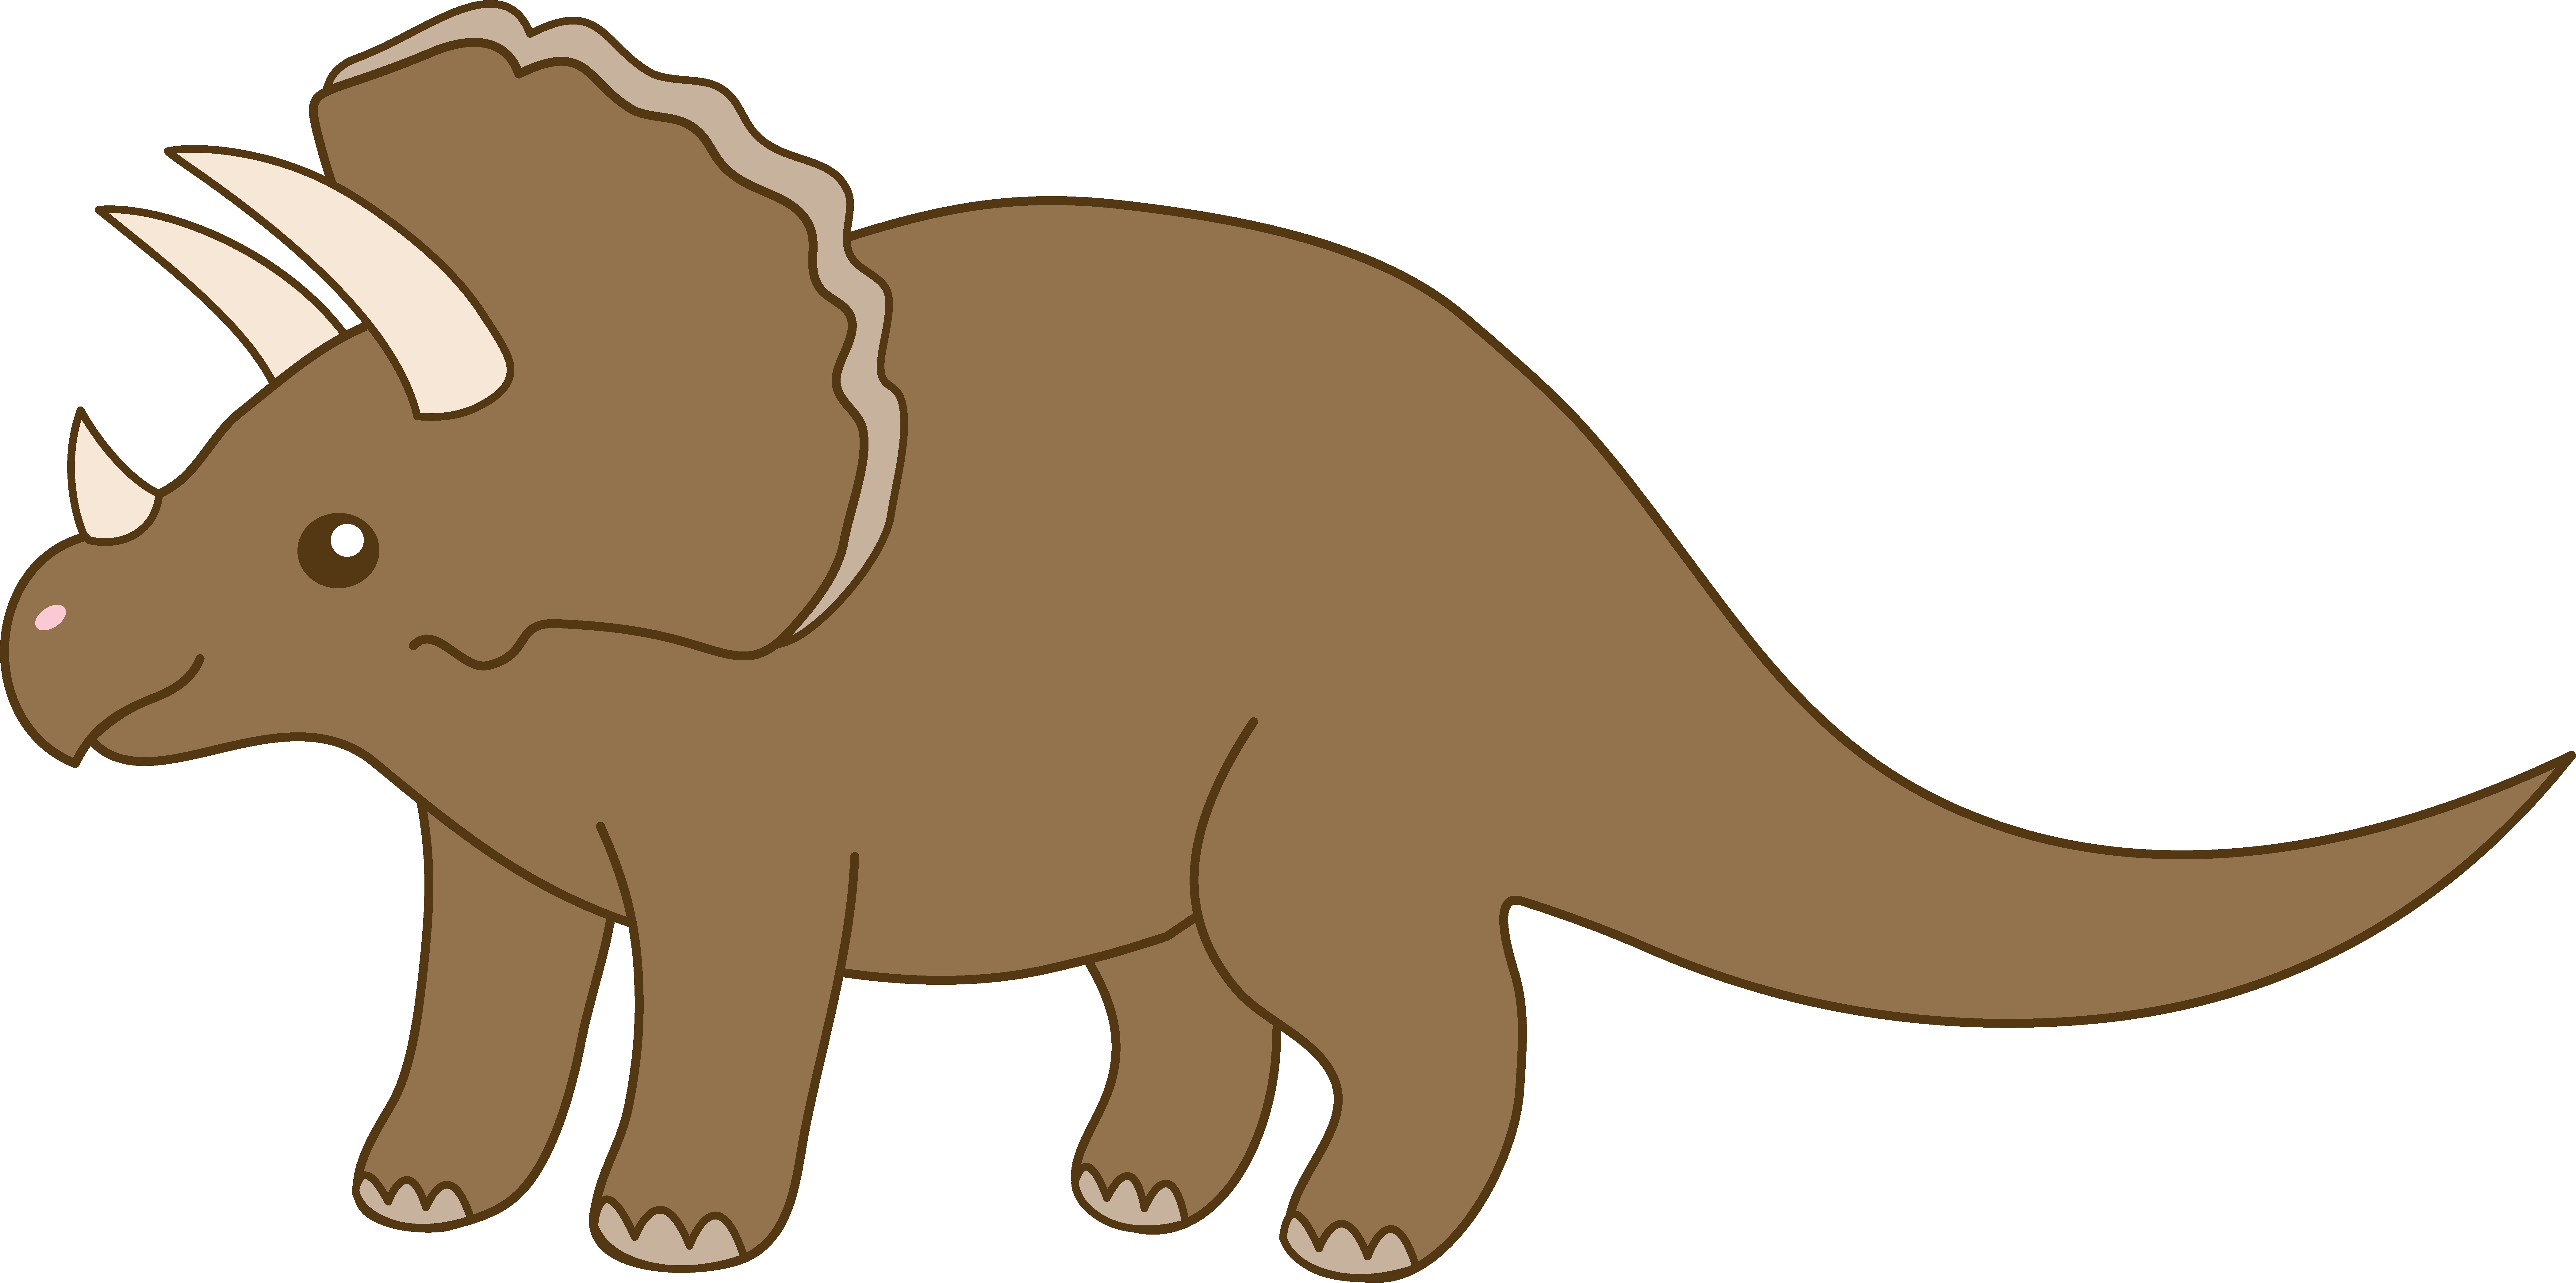 Dinosaur clip art for pre free clipart images